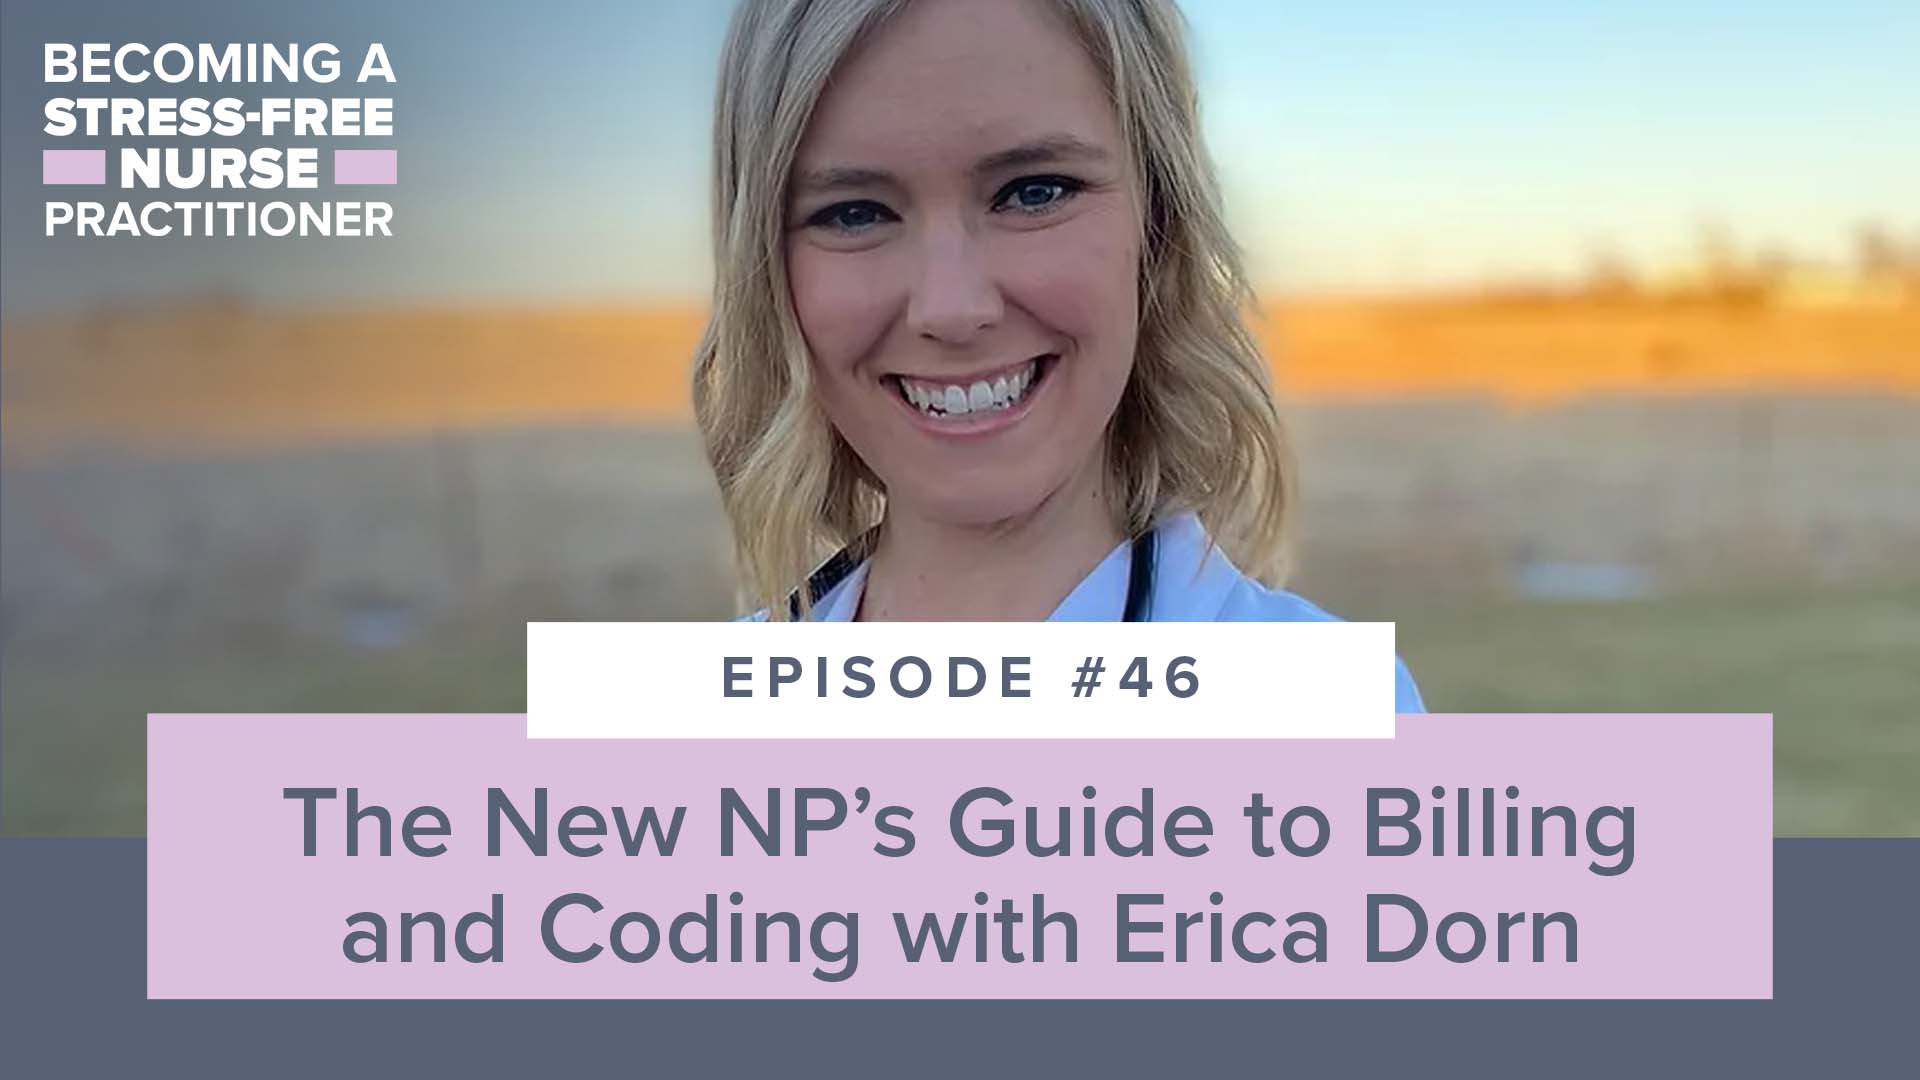 SMNP Blog - Ep #46: The New NP’s Guide to Billing and Coding with Erica D the NP